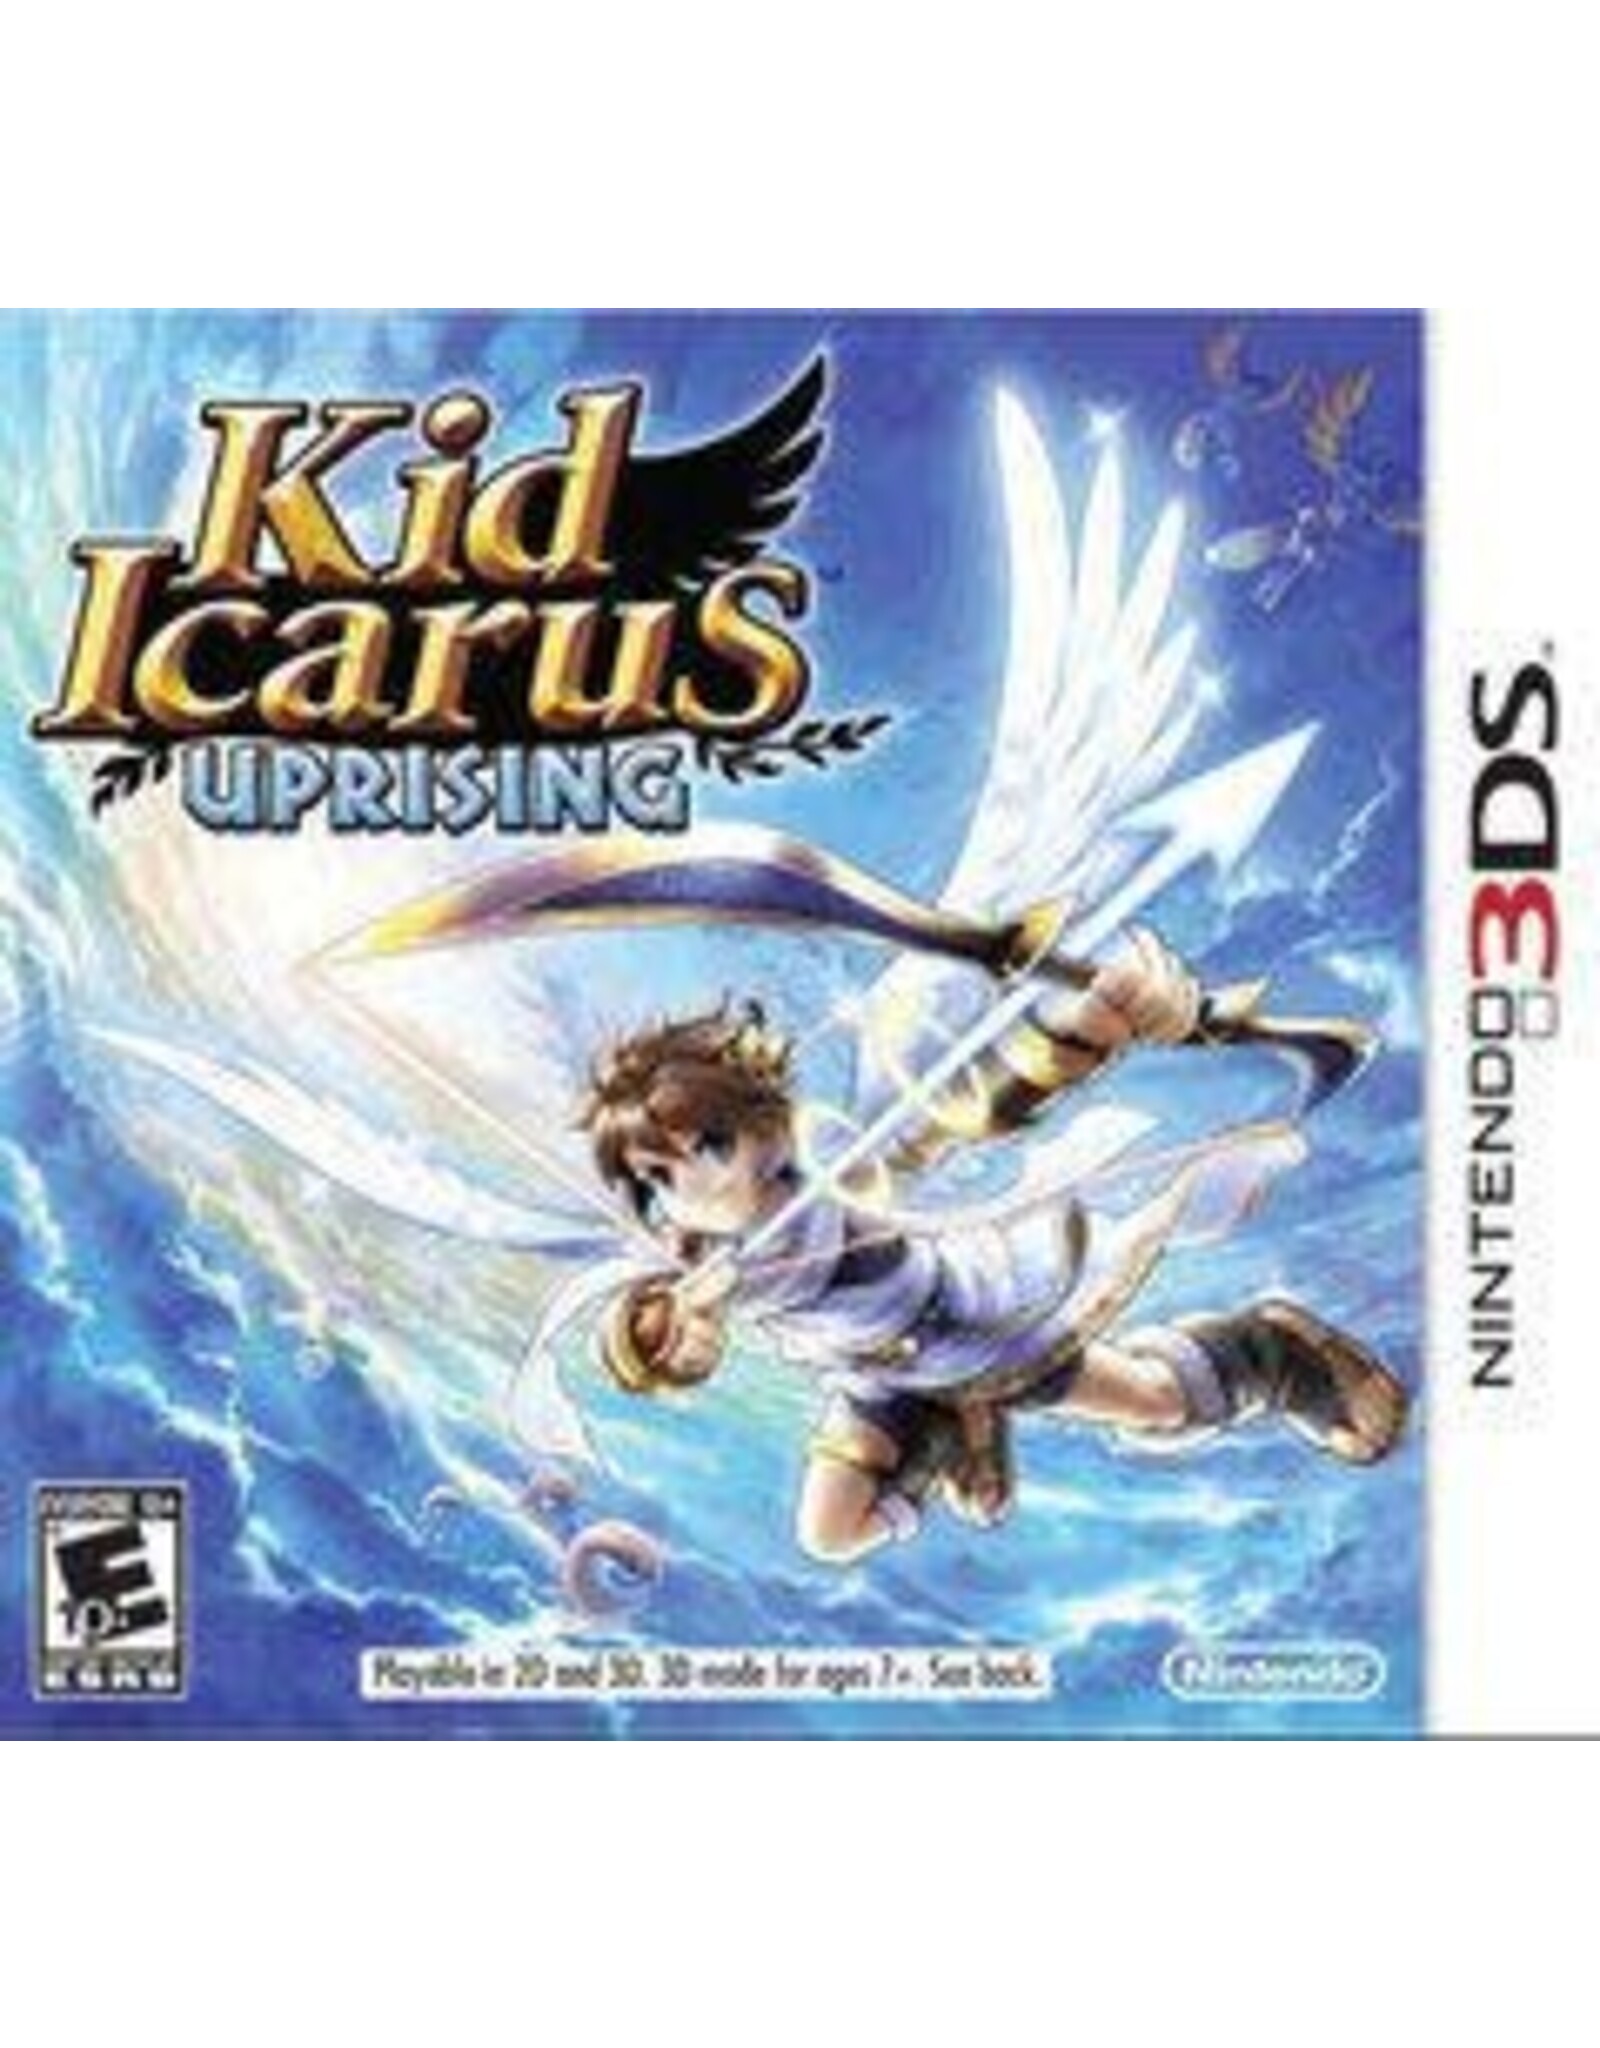 Used Game - Nintendo 3DS - Kid Icarus [Cart Only]